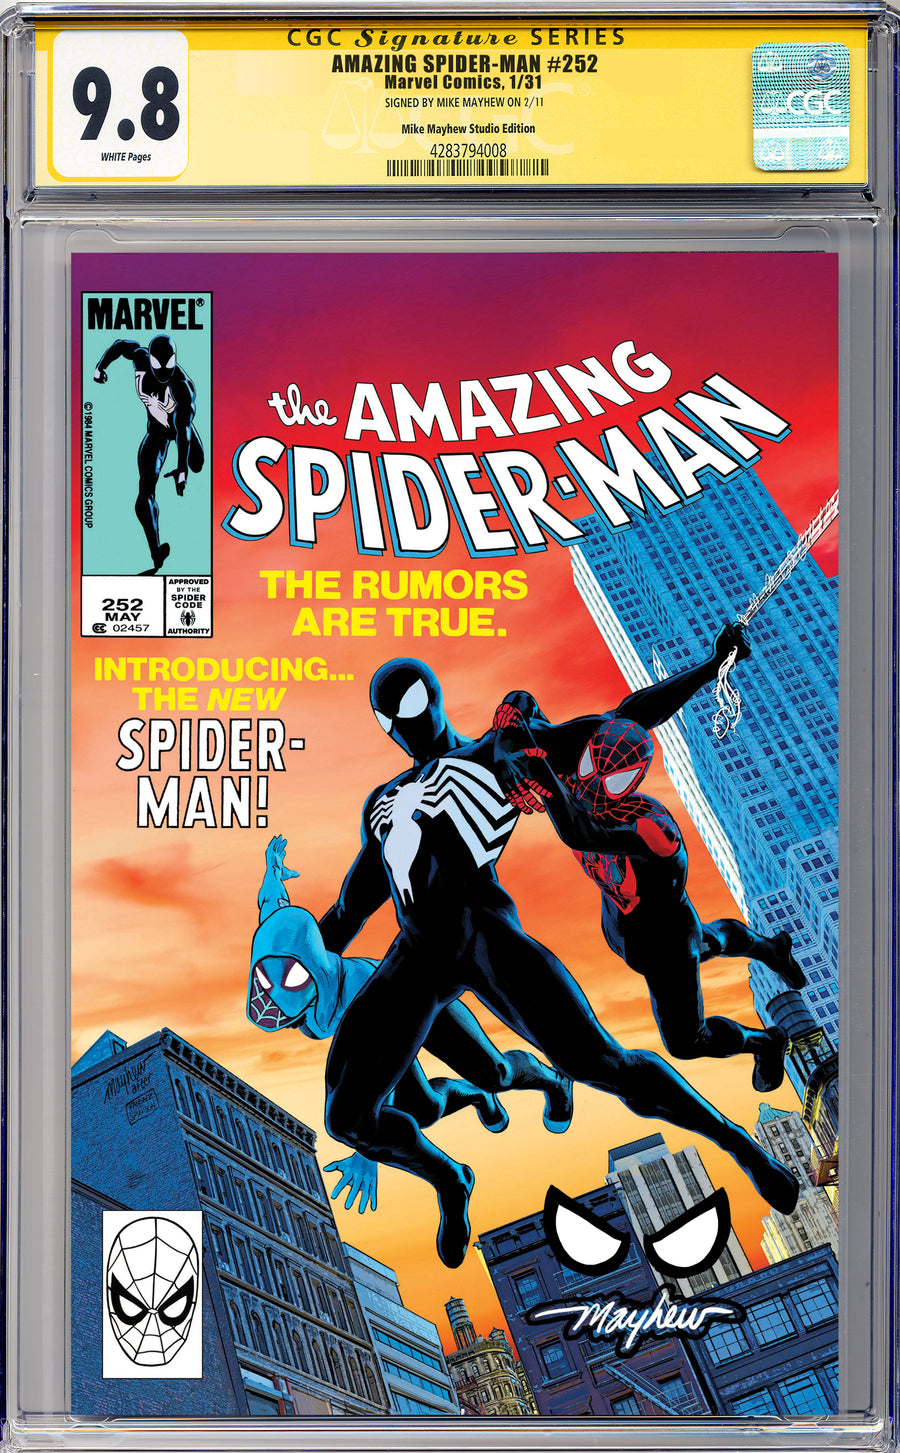 AMAZING SPIDER-MAN #252 FACSIMILE EDITION Mike Mayhew Studio Variant Cover A Trade Dress Spidey Eyes CGC Yellow Label 9.6 and Above Graded Slab